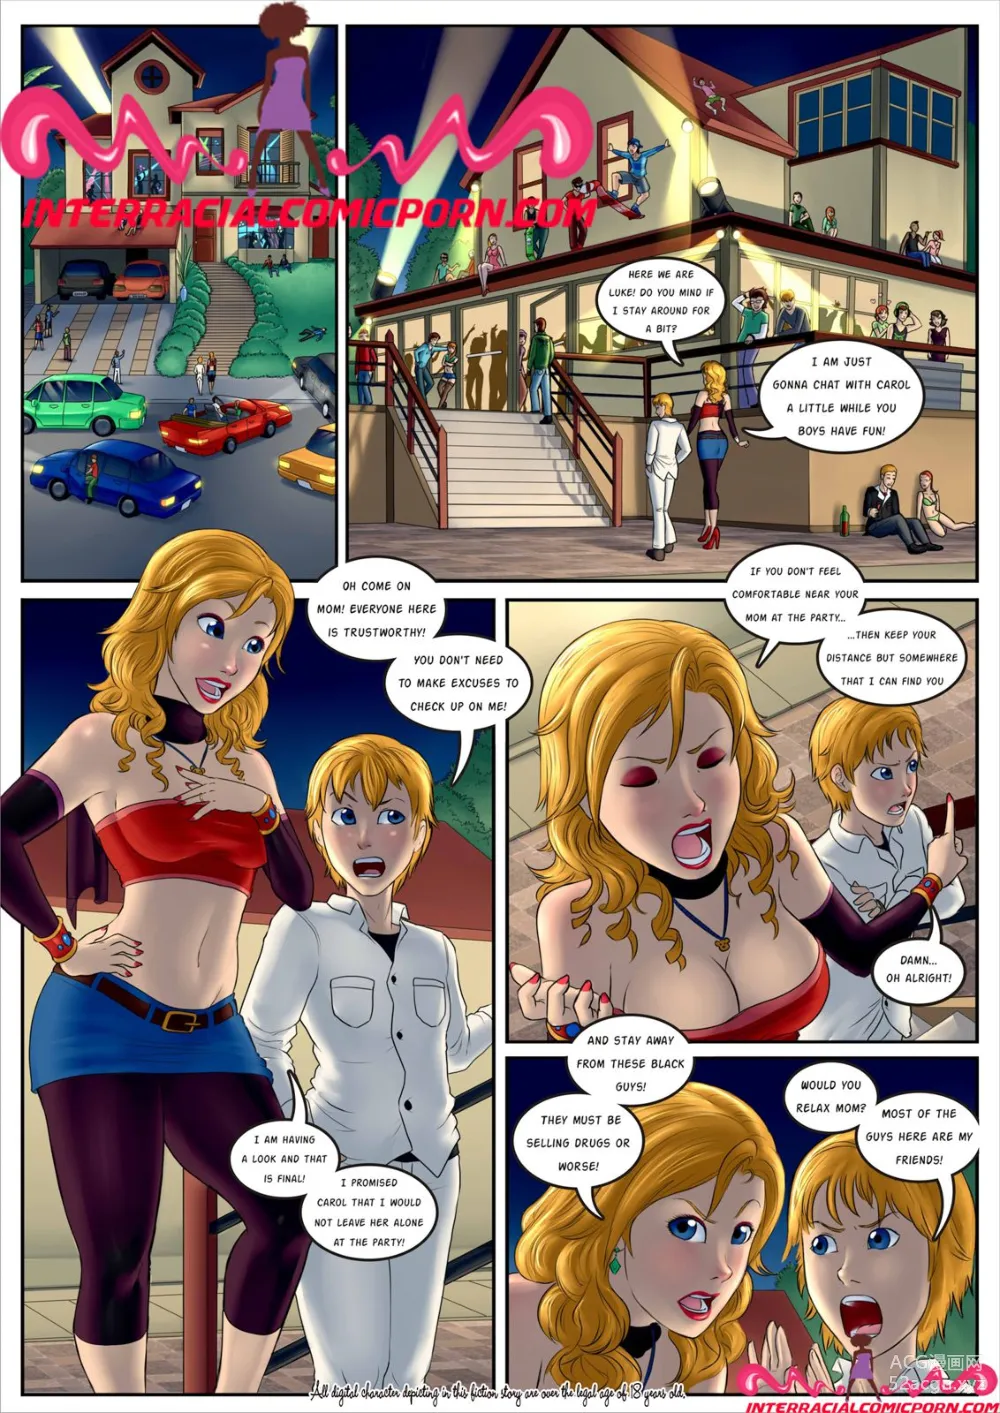 18 Years Old In Porn Cartoon - Party Slut - Chapter 1 - Western Porn Comics Western Adult Comix